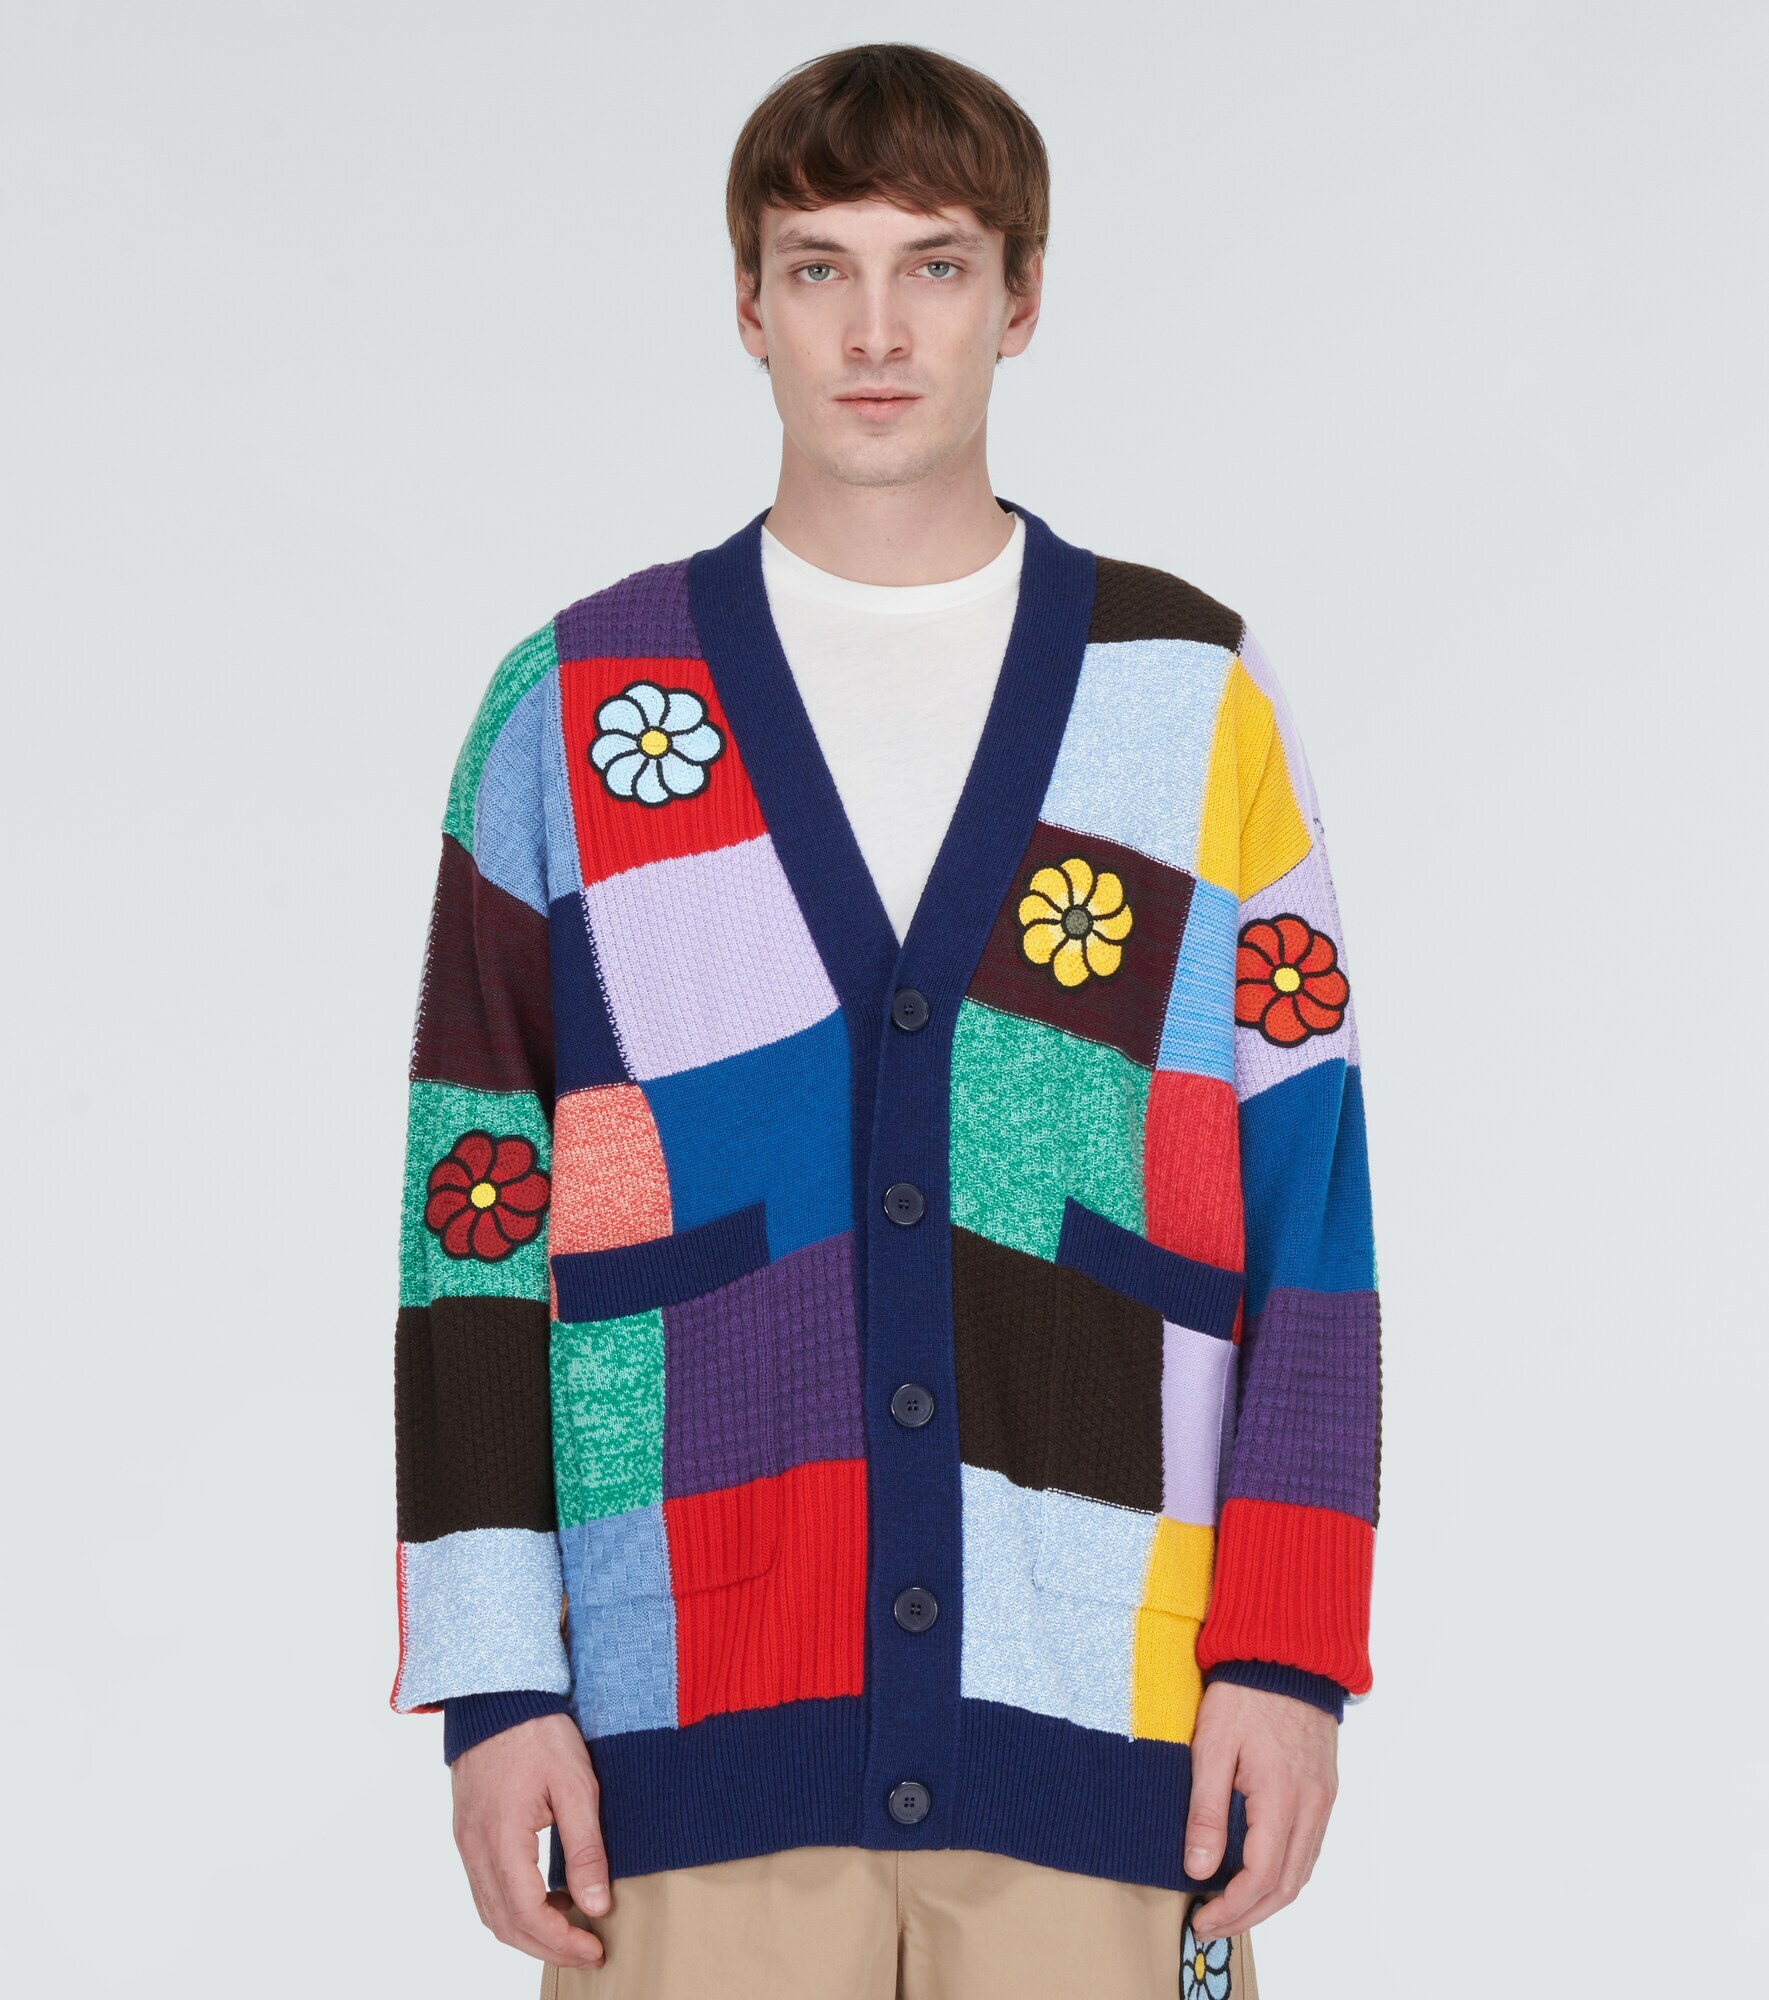 Moncler Genius - 1 Moncler JW Anderson cashmere and wool cardigan ...